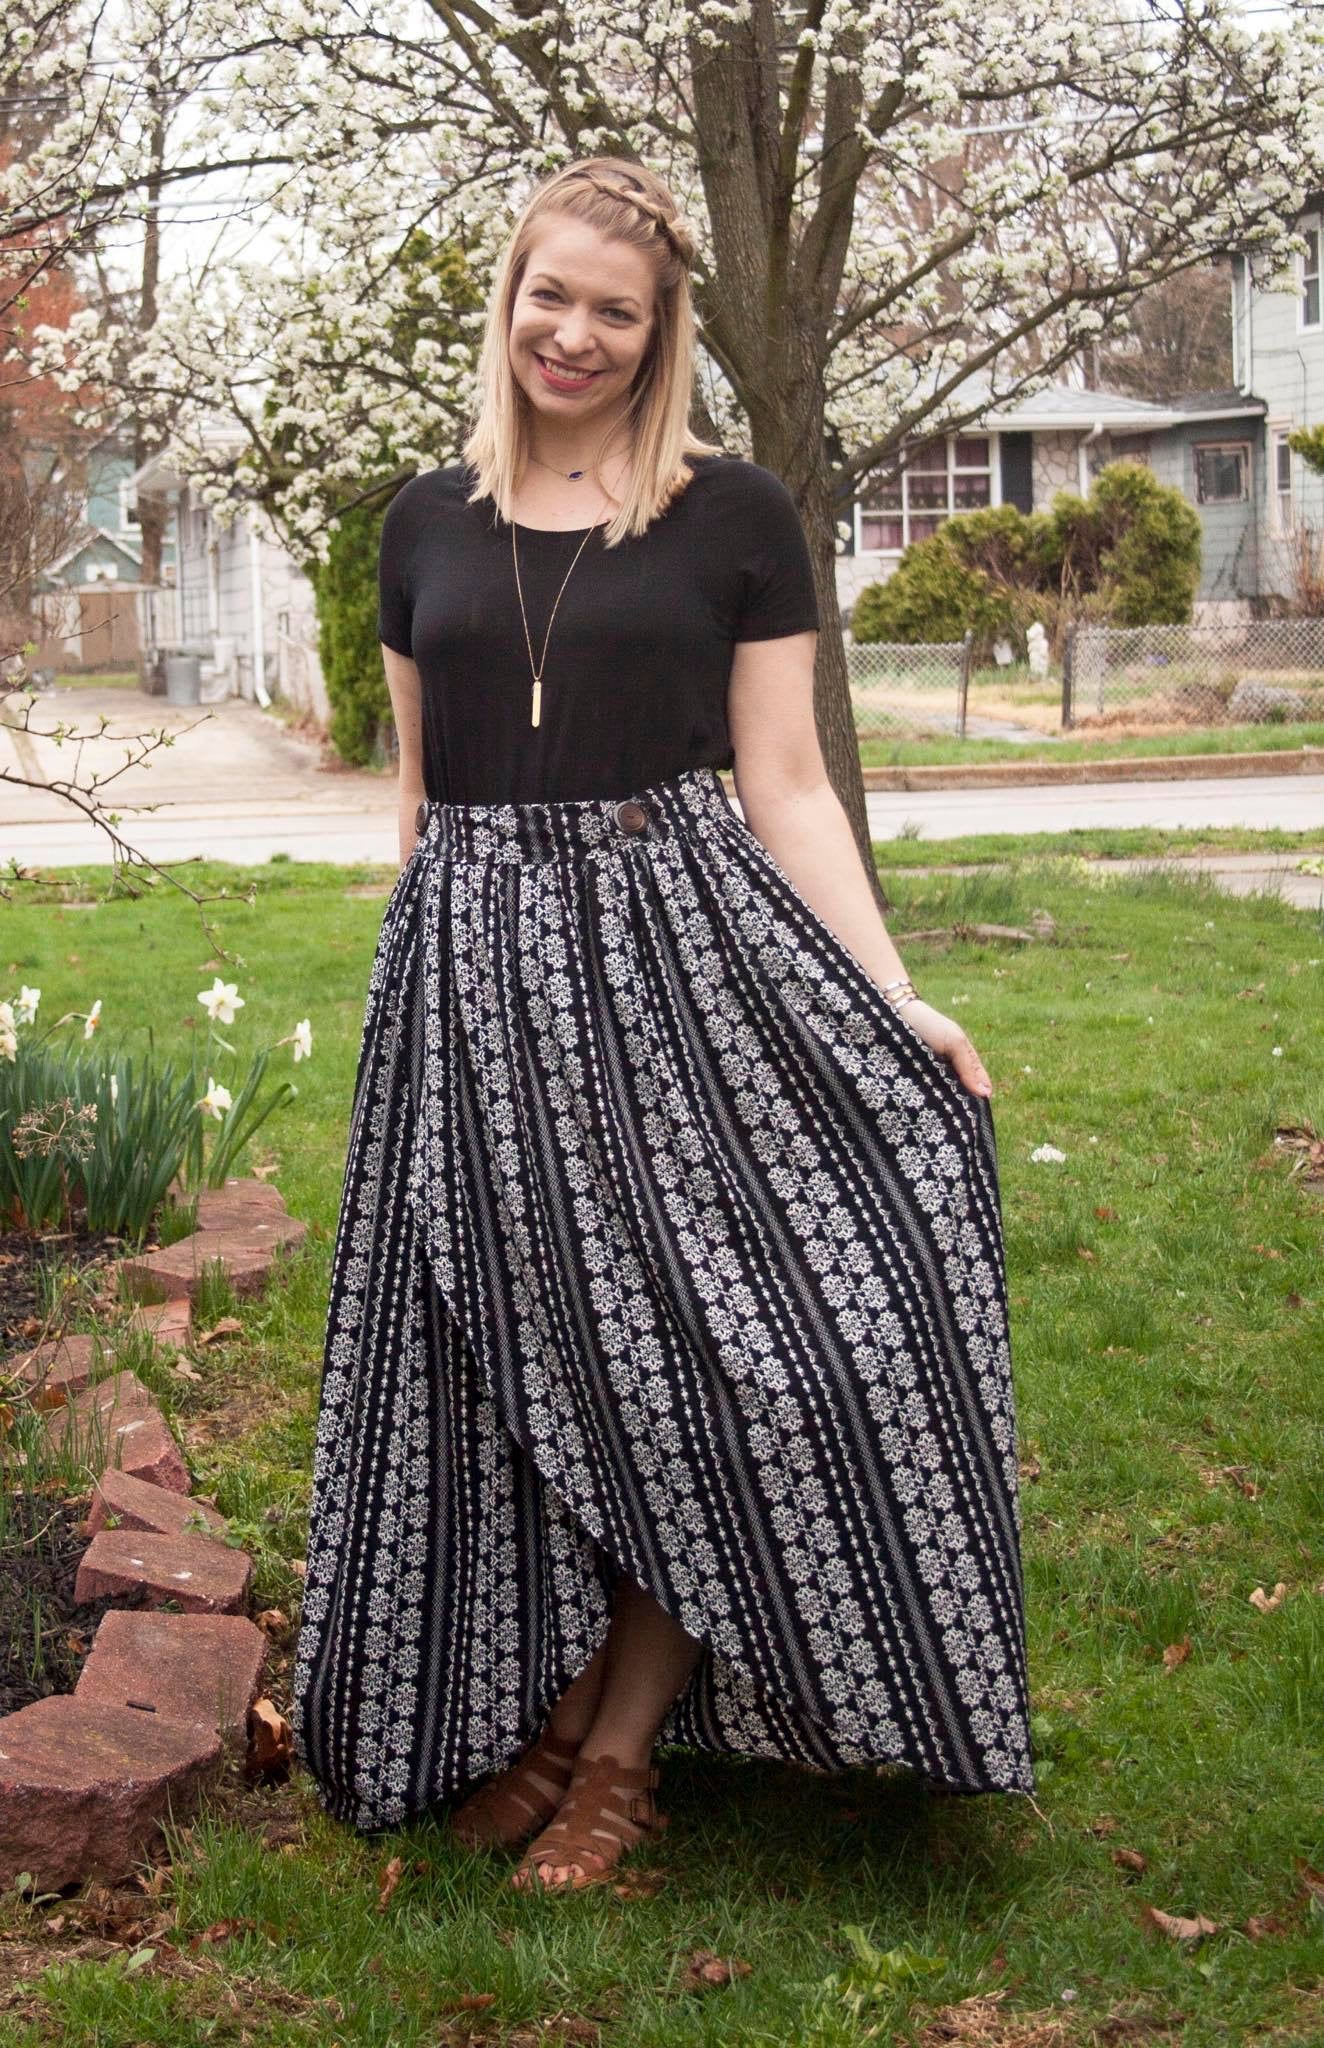 How to Draft and Sew a Half Circle Skirt 4 panels  Gwenstella Made